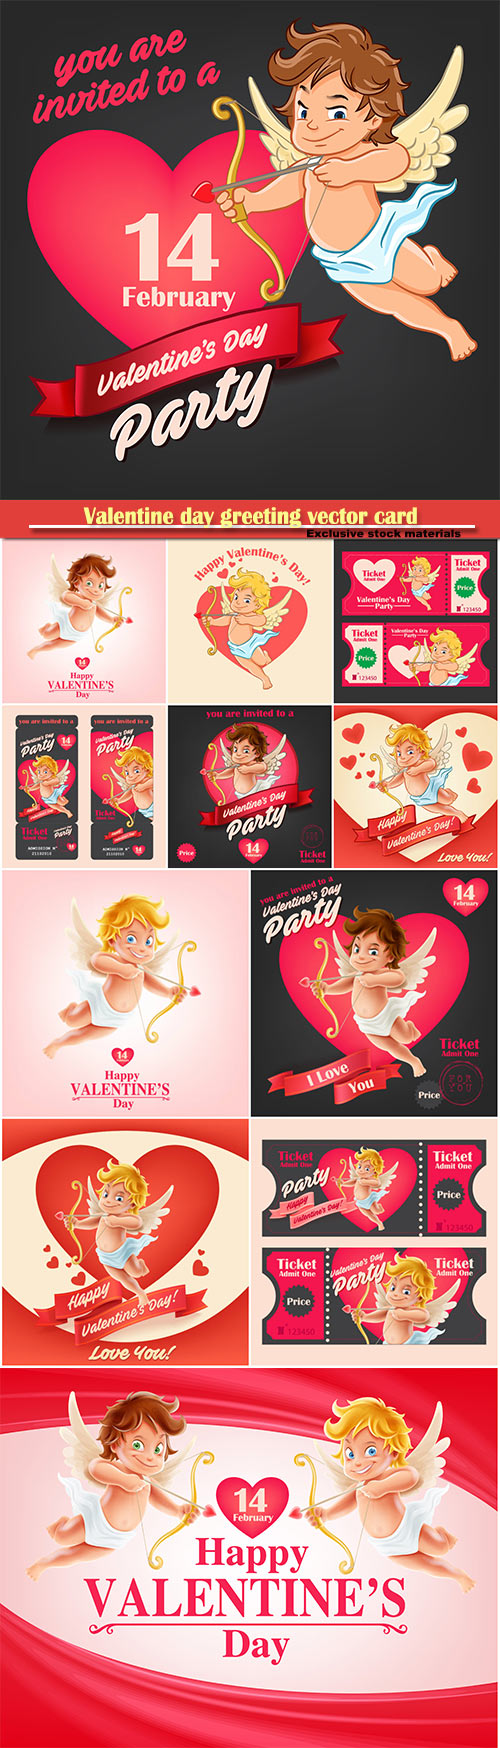 Valentine day greeting vector card, hearts i love you, cupids # 29